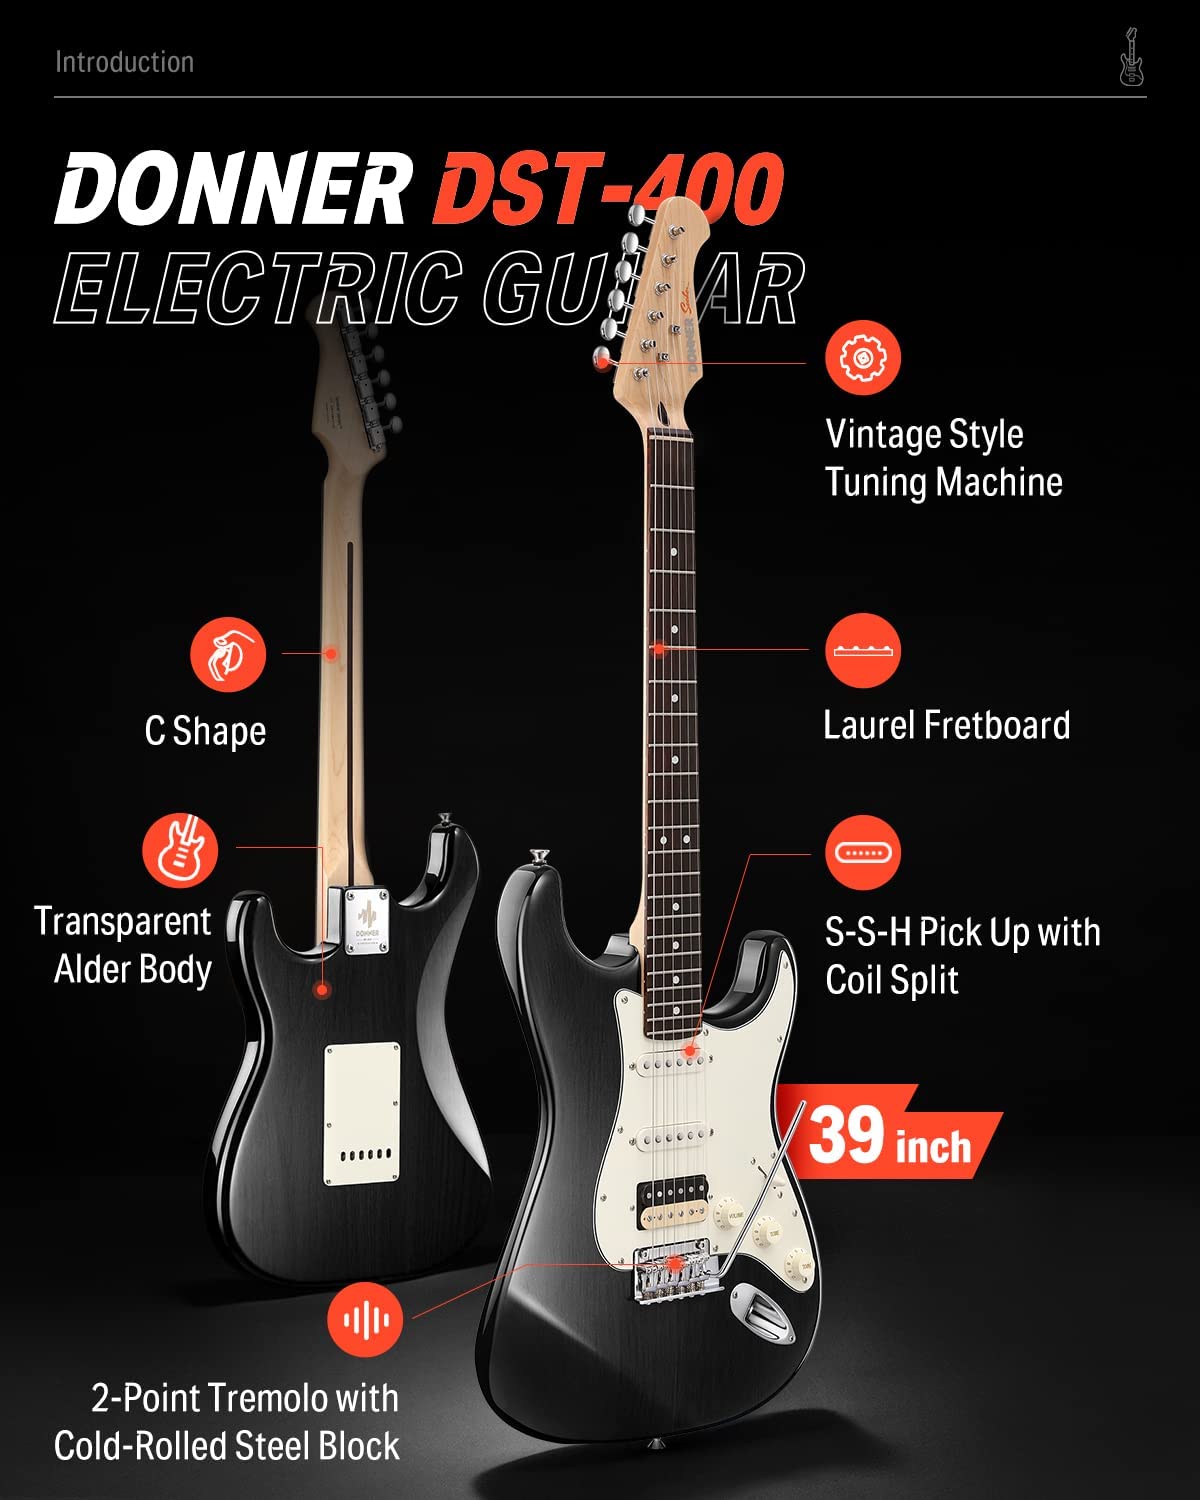 Donner 39 Inch Electric Guitar, Designer Series DST-200 Stylish Solid Body  Electric Guitar for Beginner Intermediate ＆ Pro Players, Single Coil Split  ギター